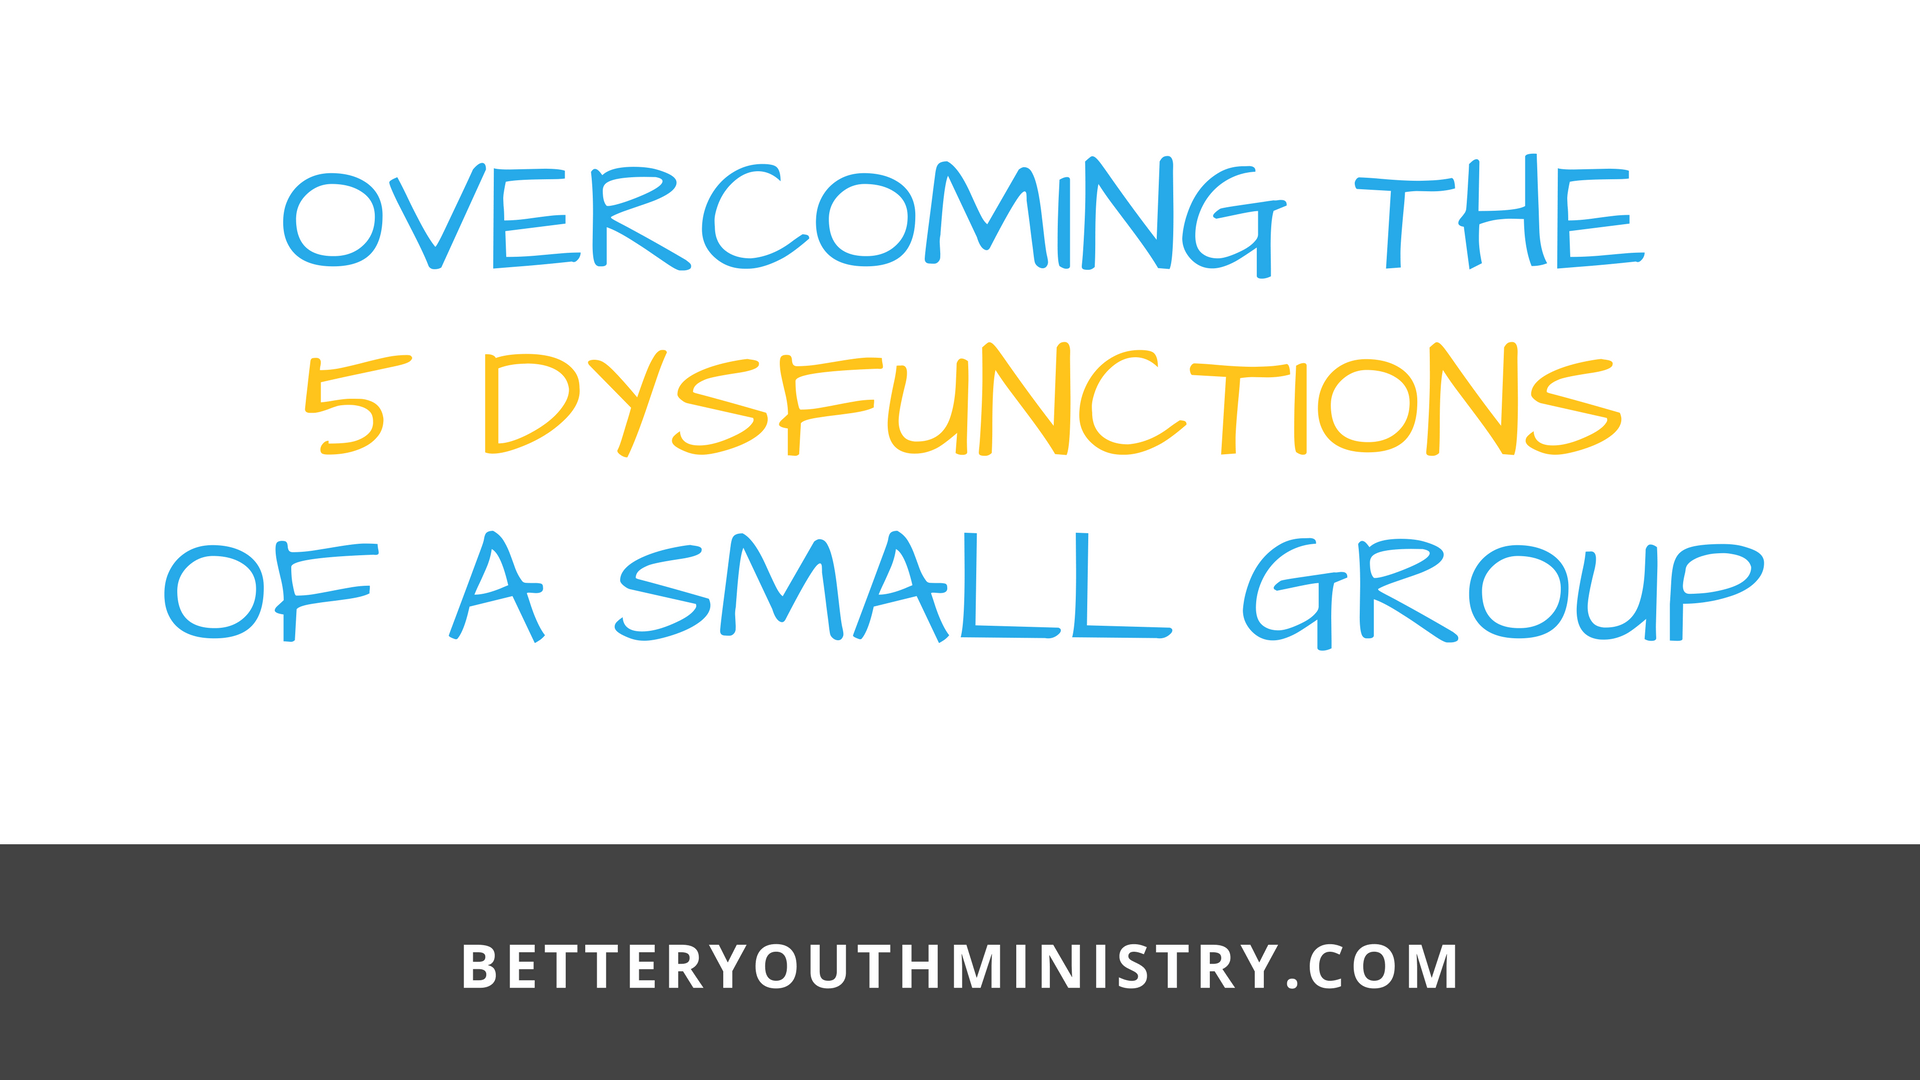 5 Dysfunctions of a small group